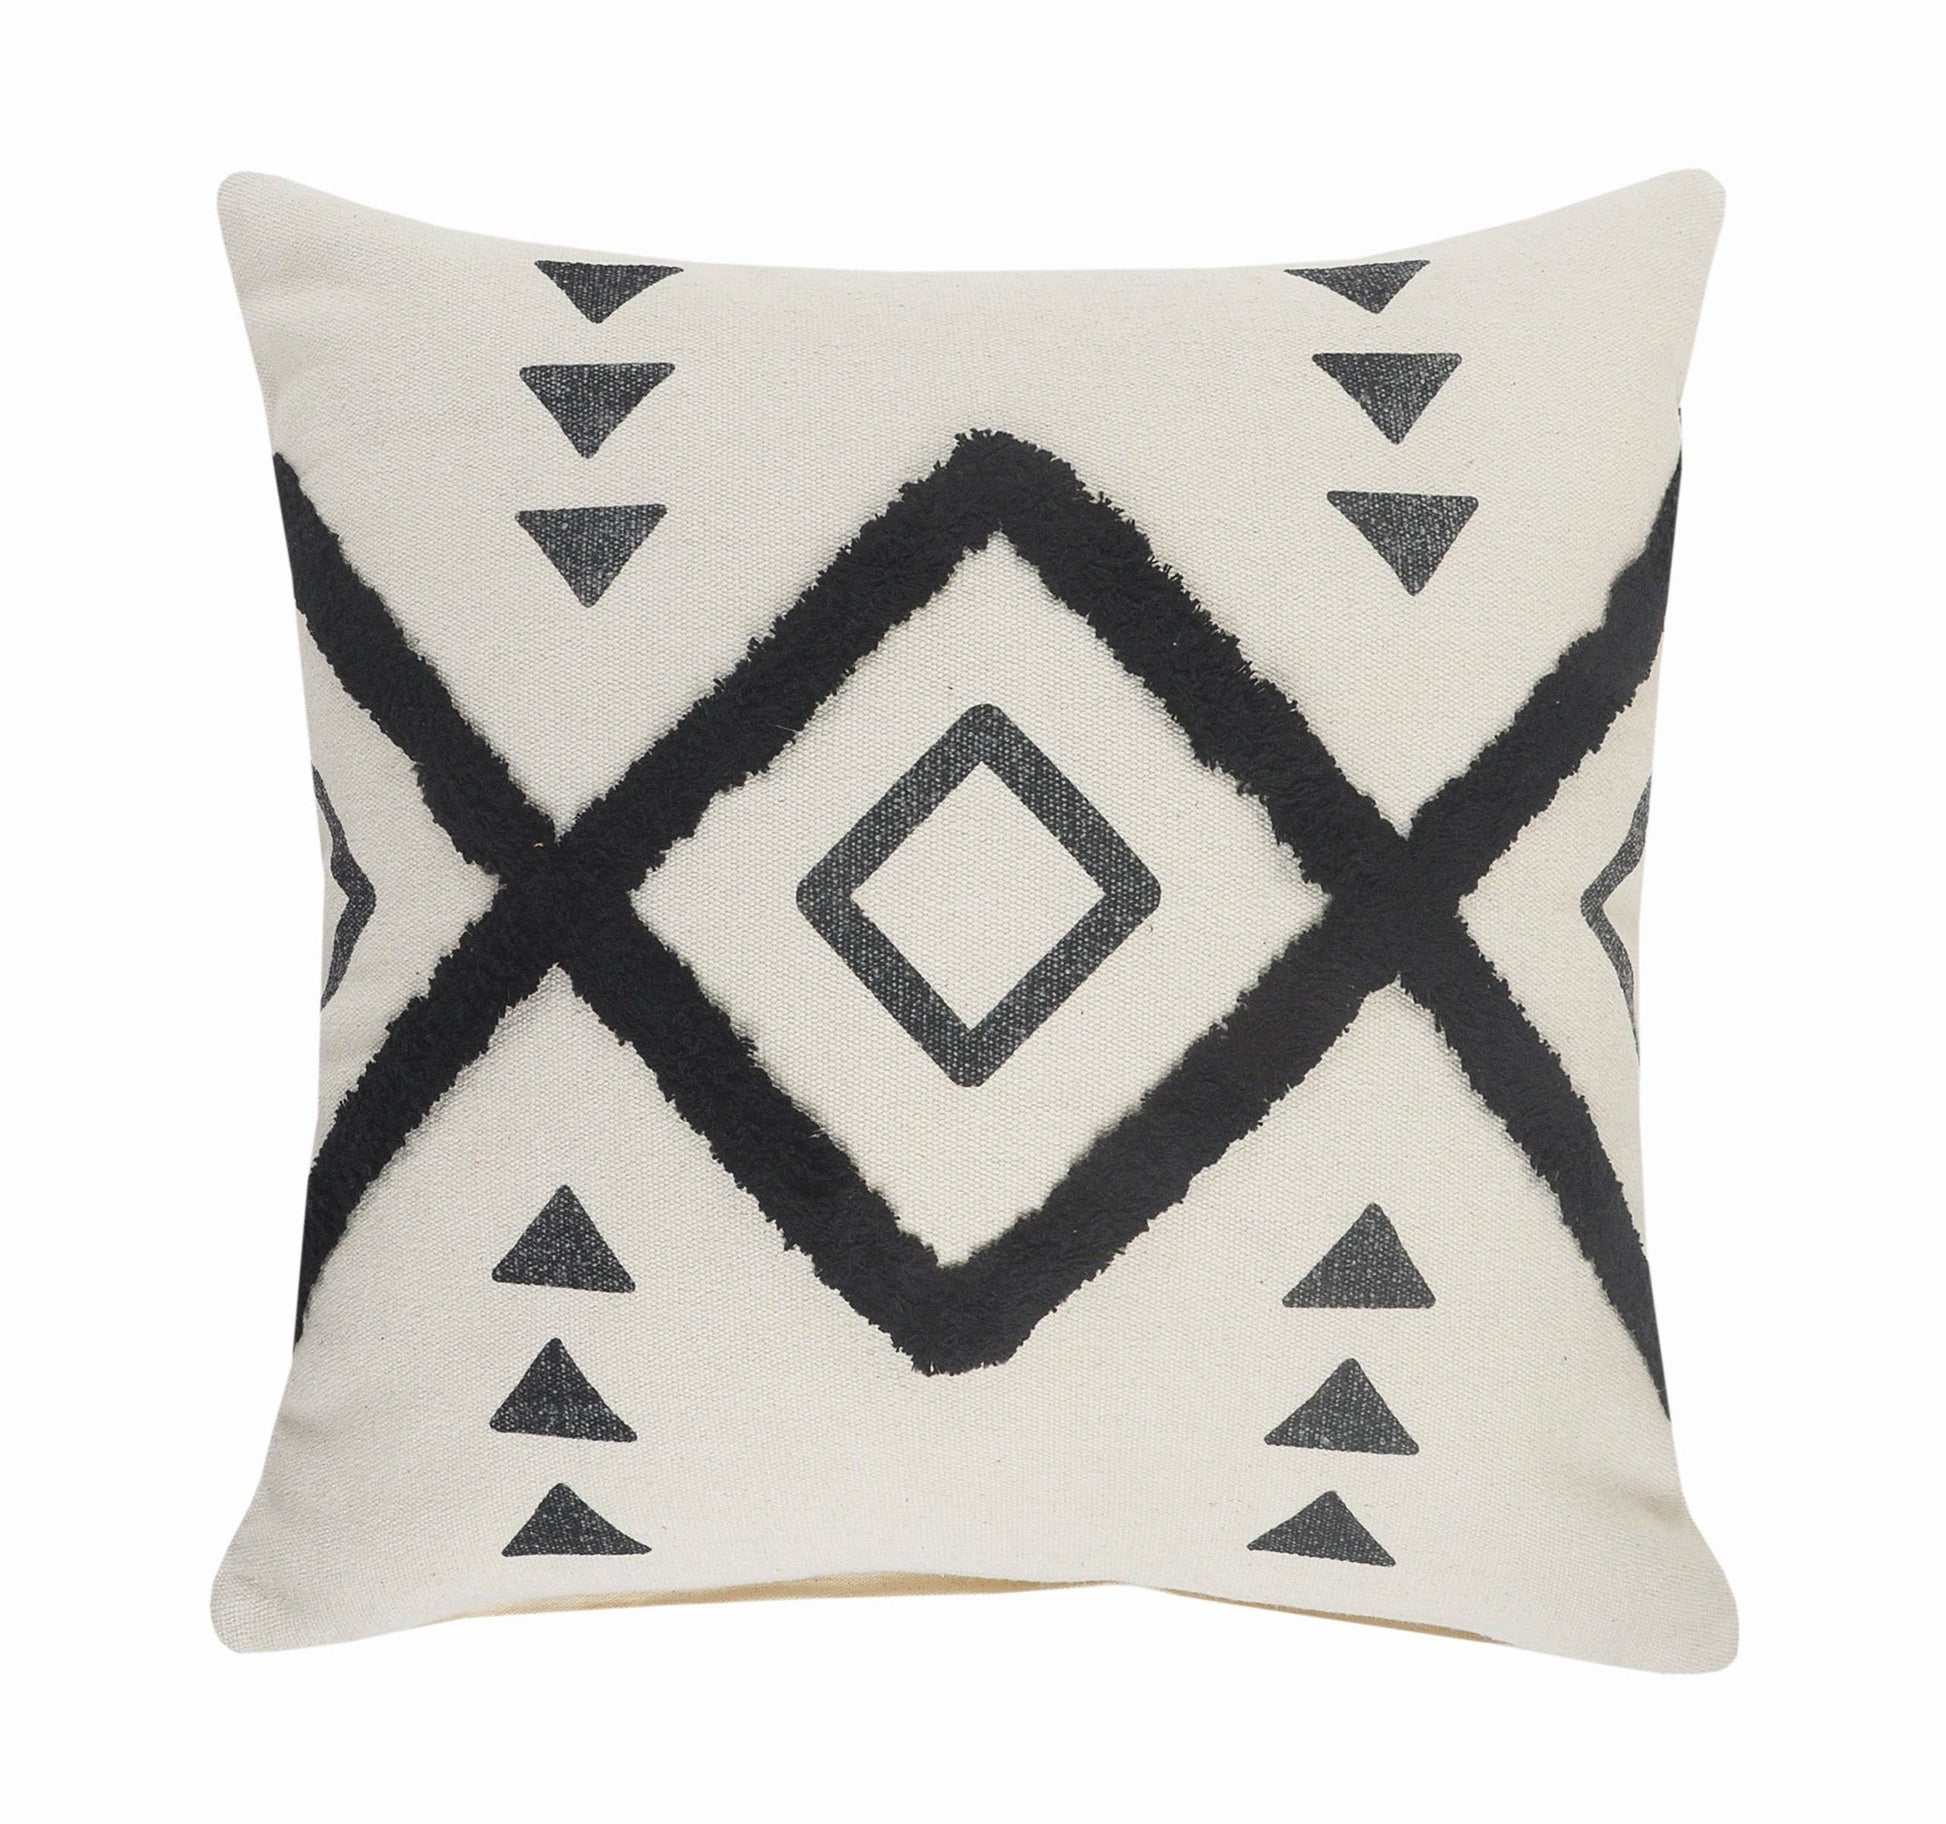 Black and White Pillow with Plain White Background